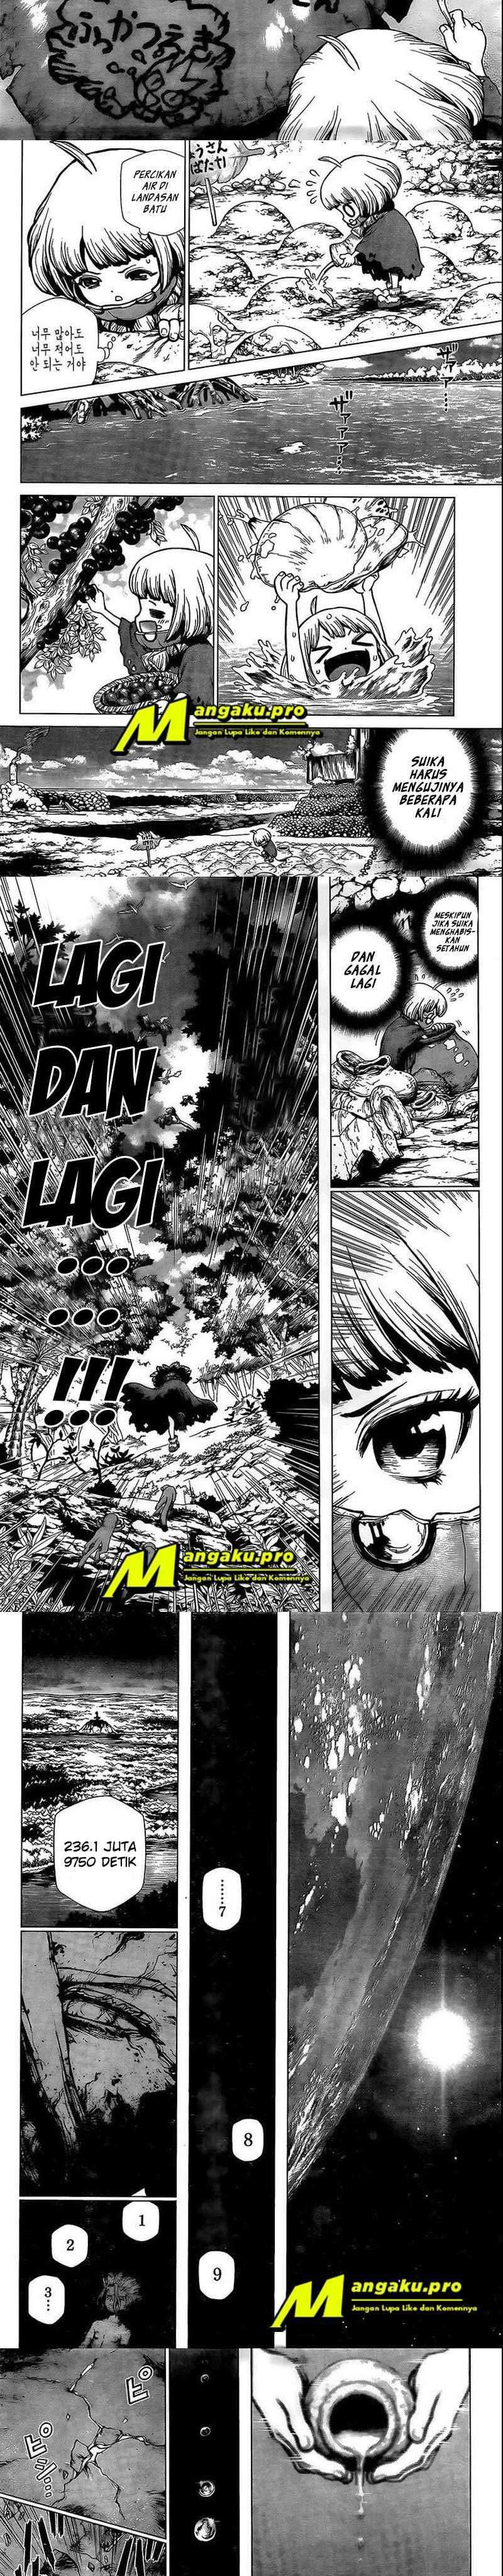 Dr. Stone Chapter 196